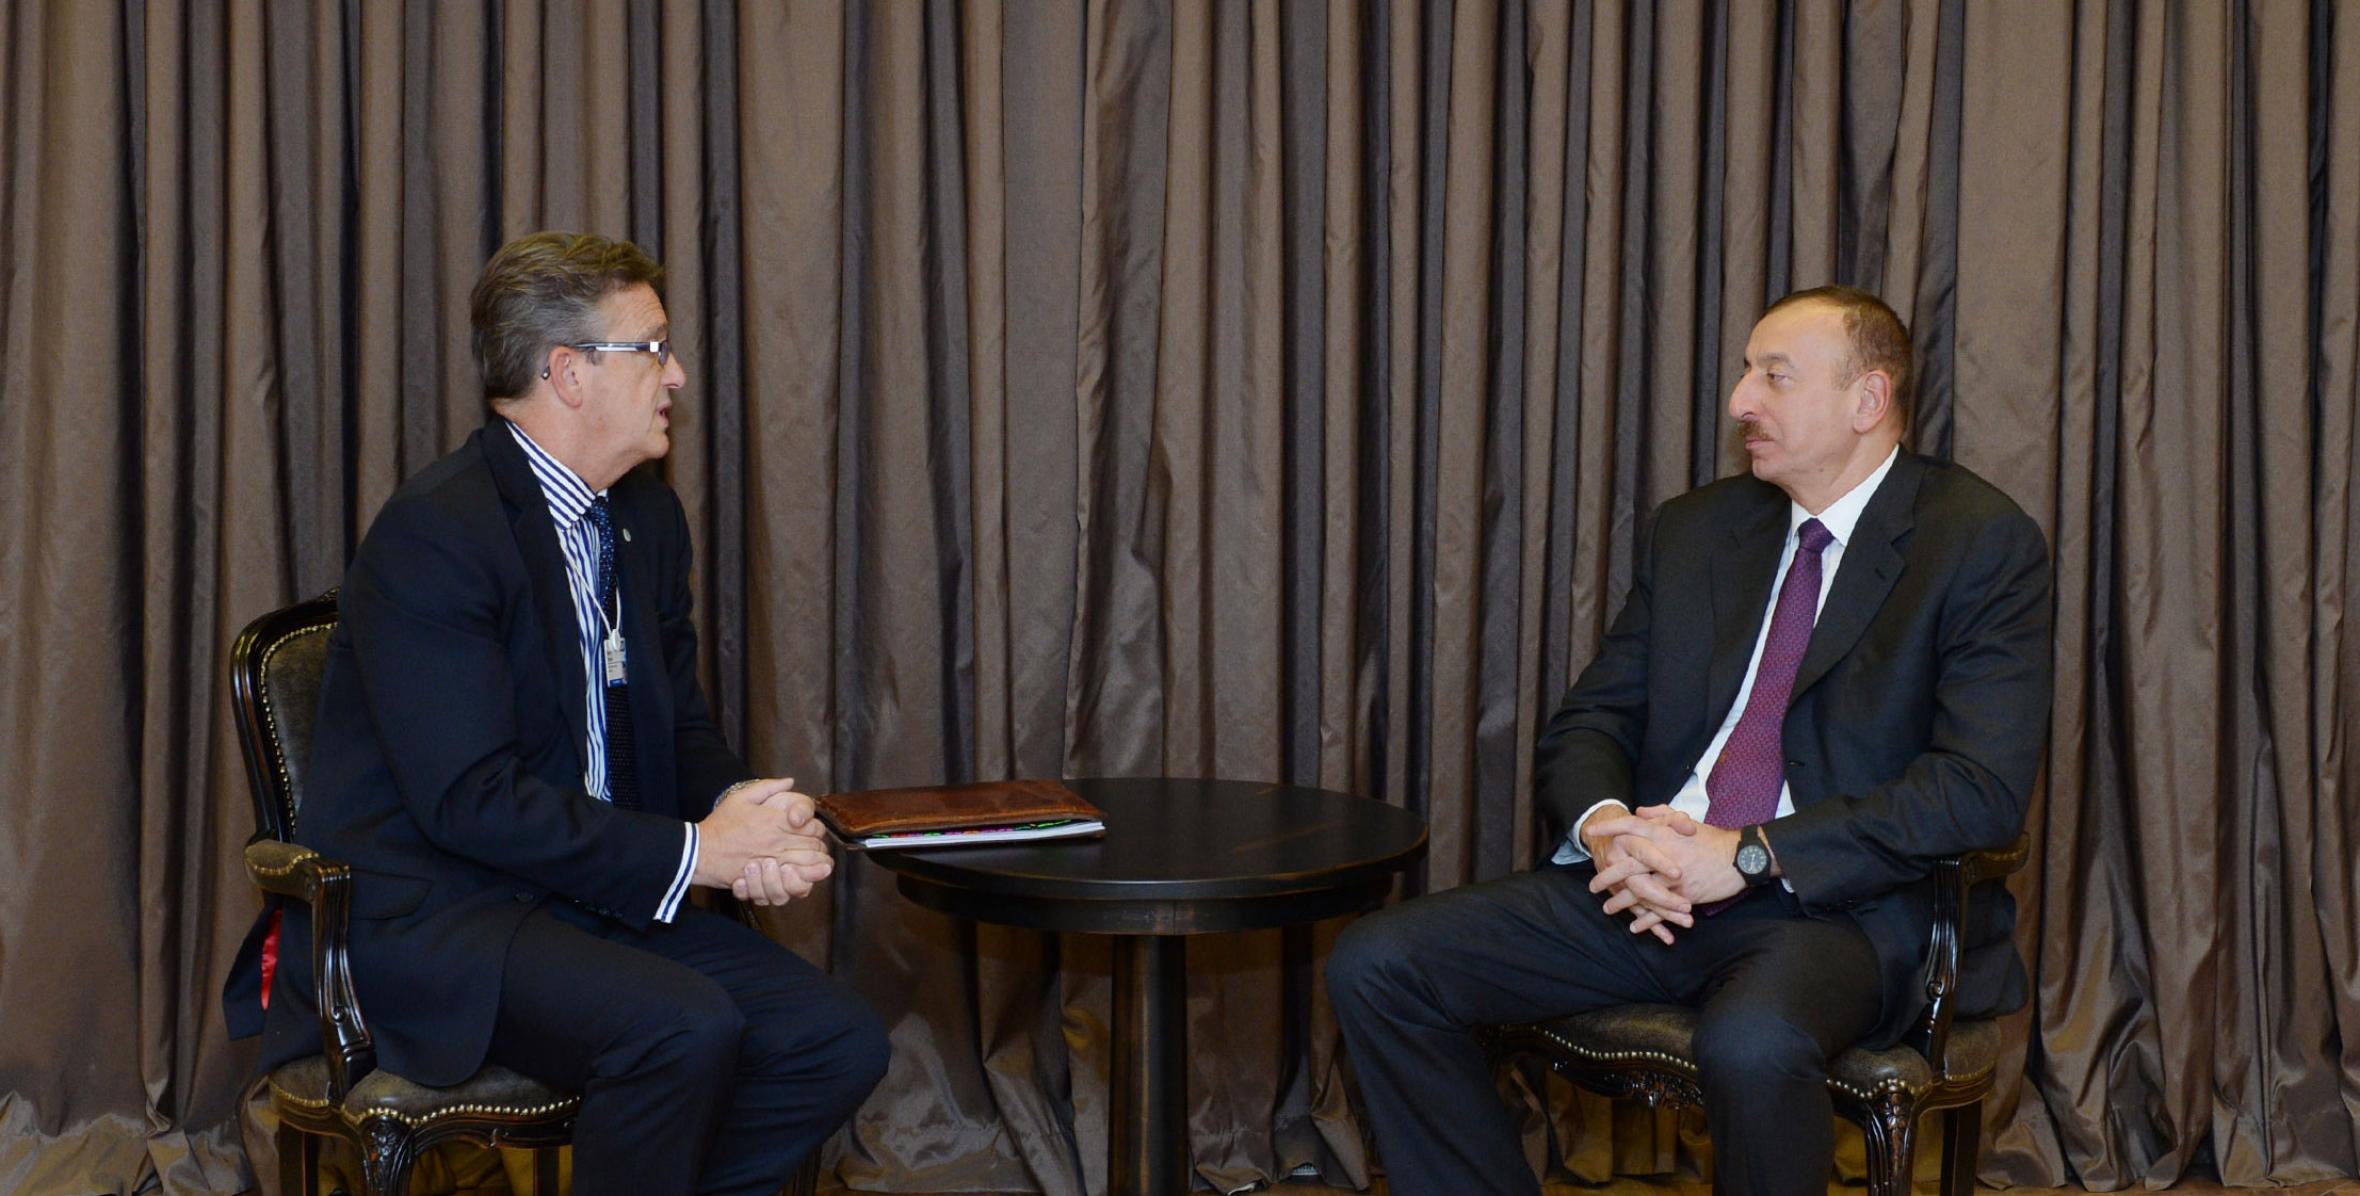 Ilham Aliyev met with Chairman of Swiss Re for International Relations Martin Parker in Davos